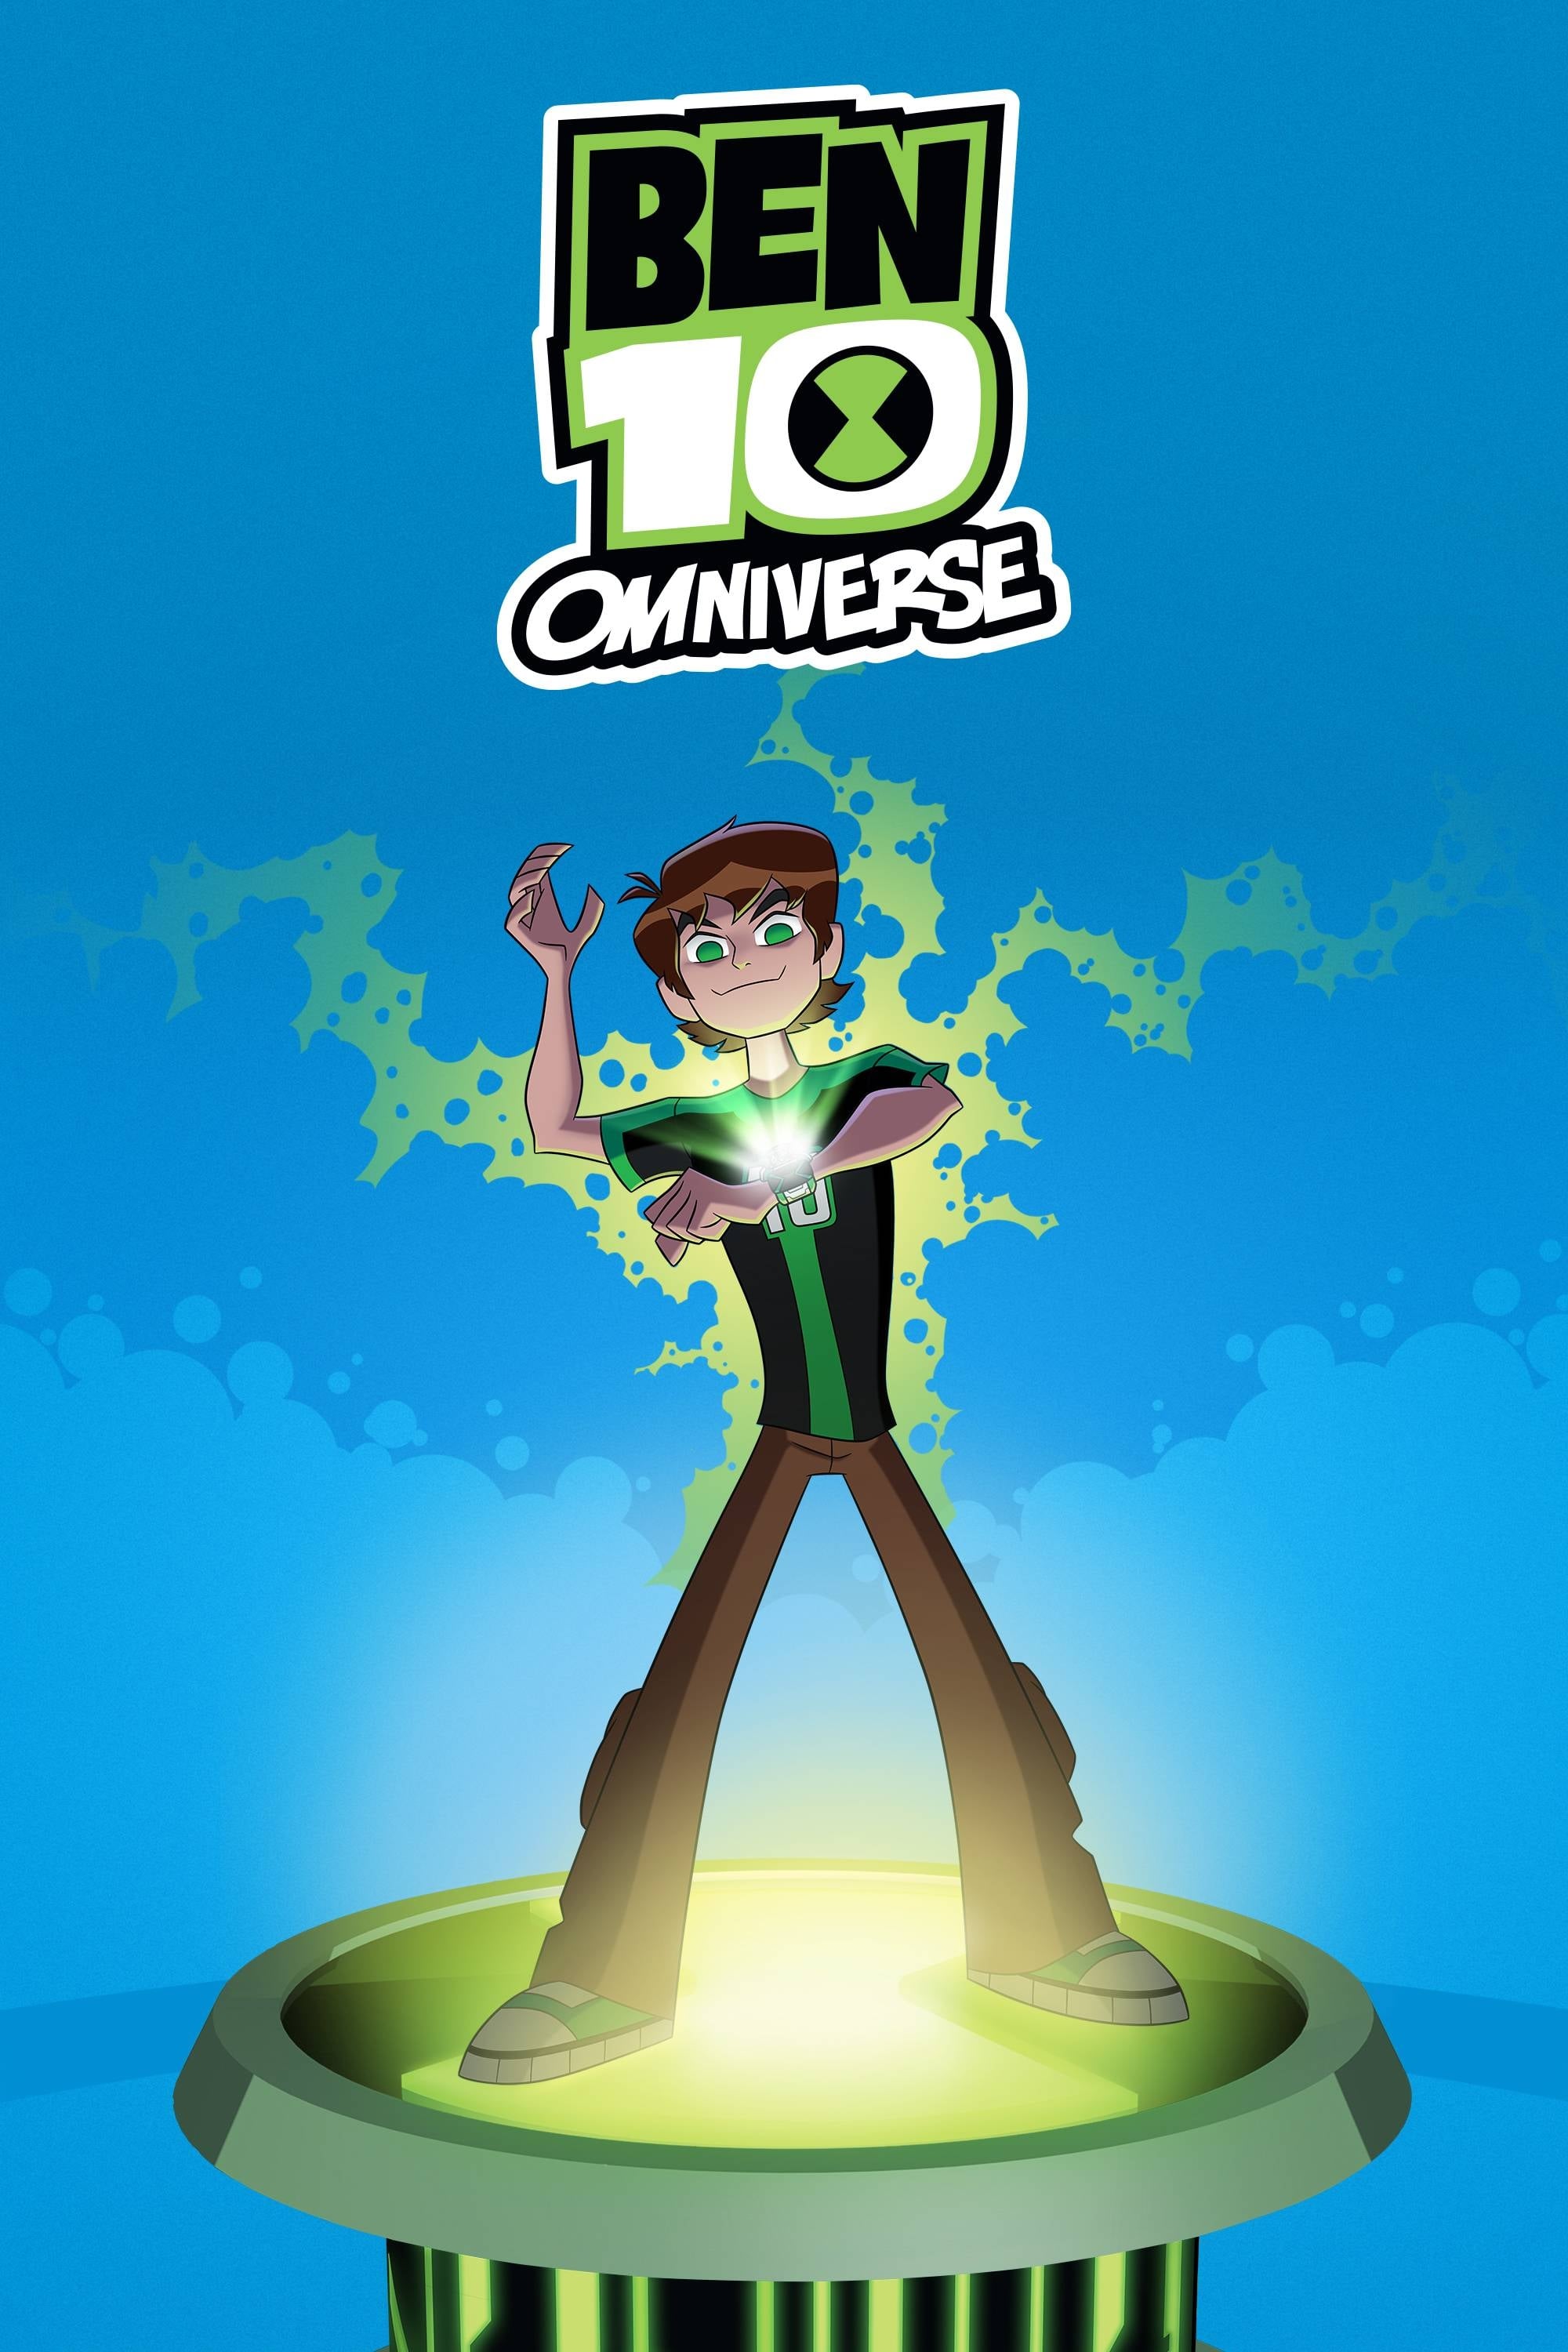 Ben 10: Omniverse TV Shows About Extraterrestrial